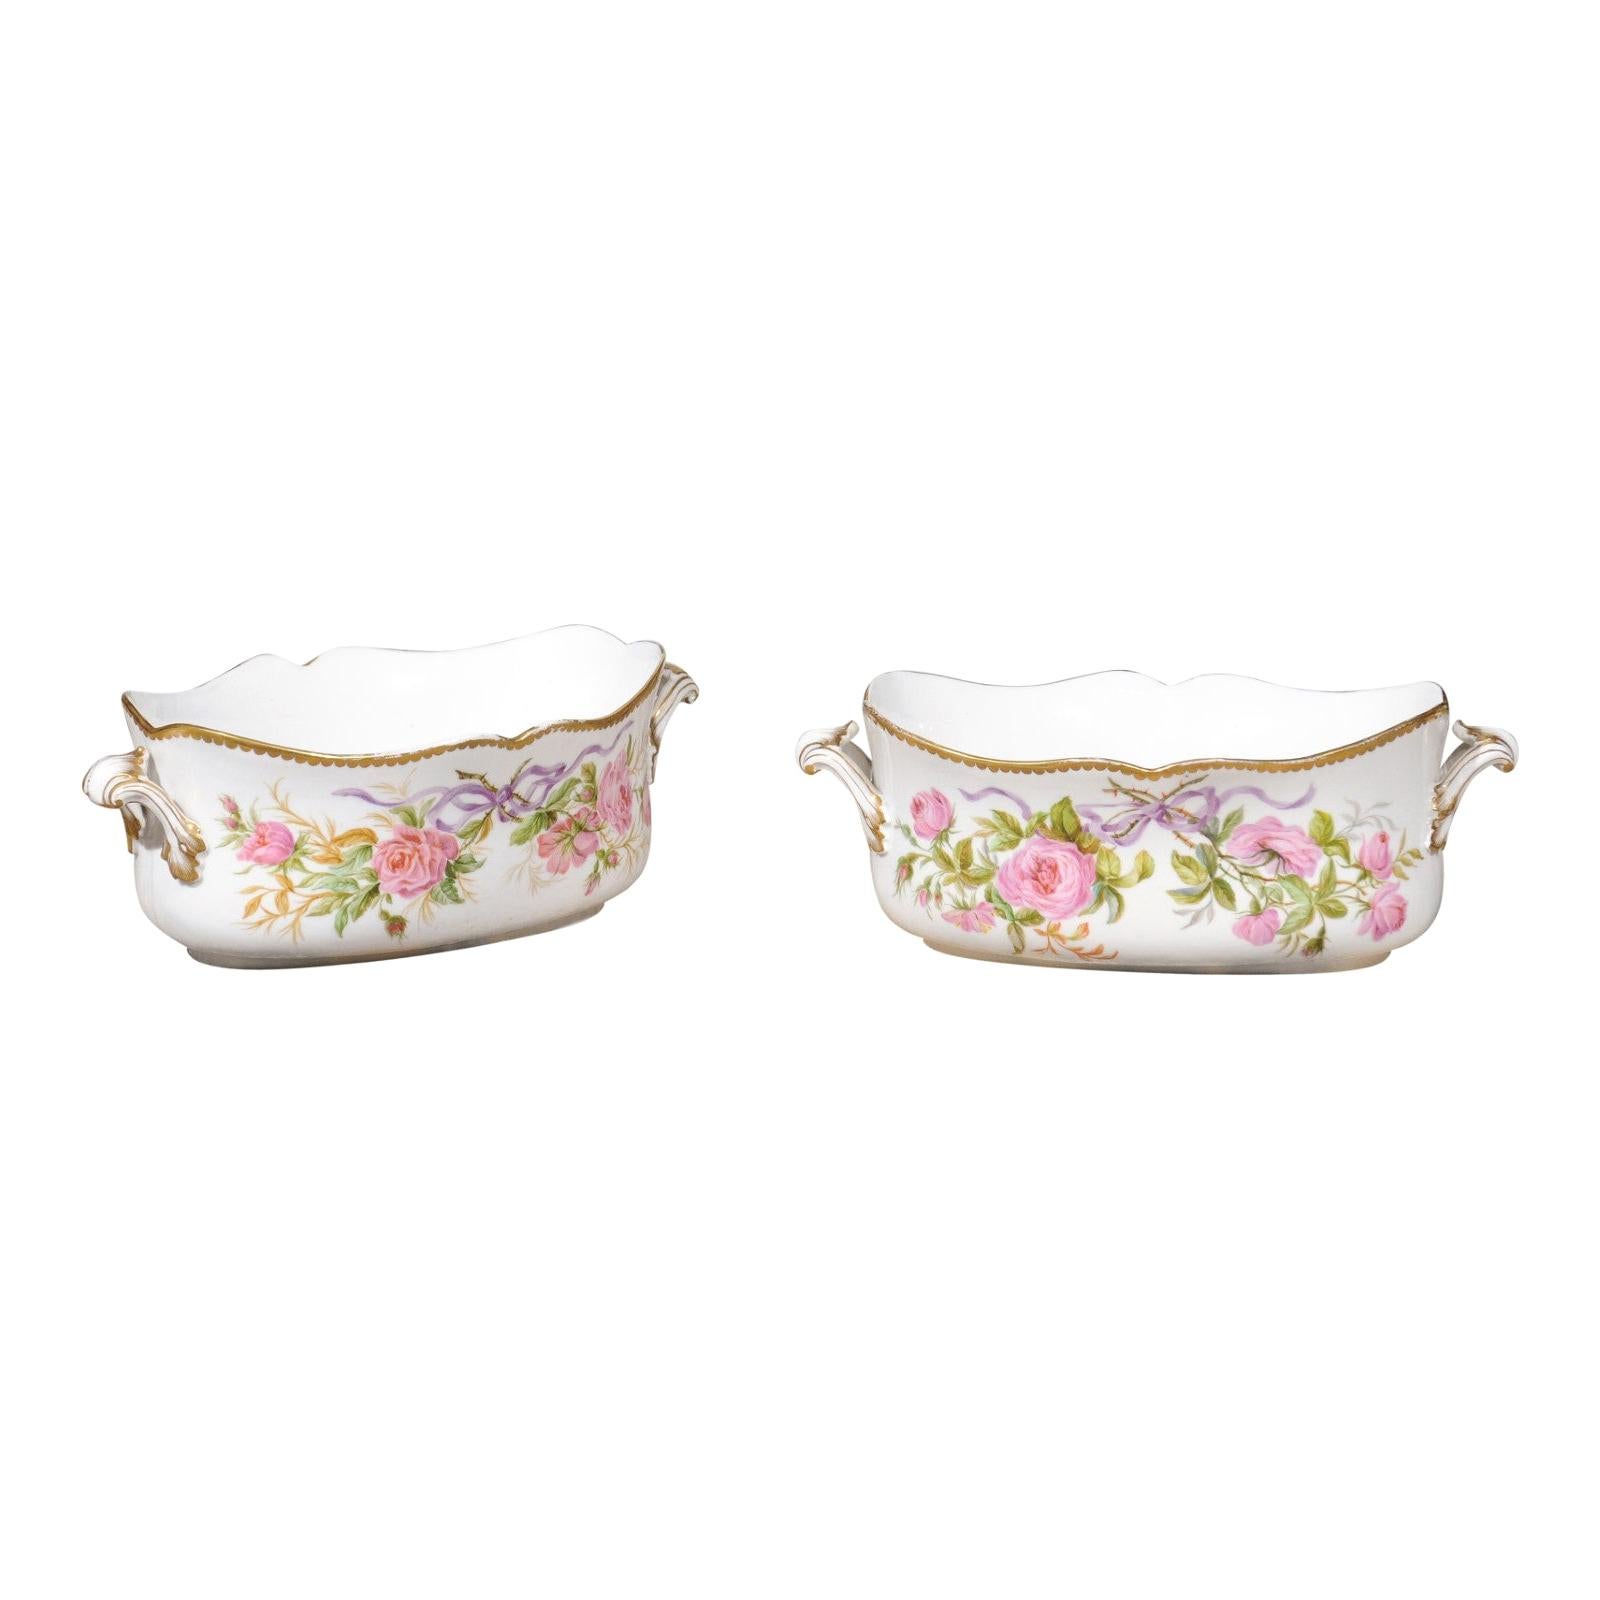 English Porcelain Bowls Depicting Bouquets of Pink Roses with Gilt Accents For Sale